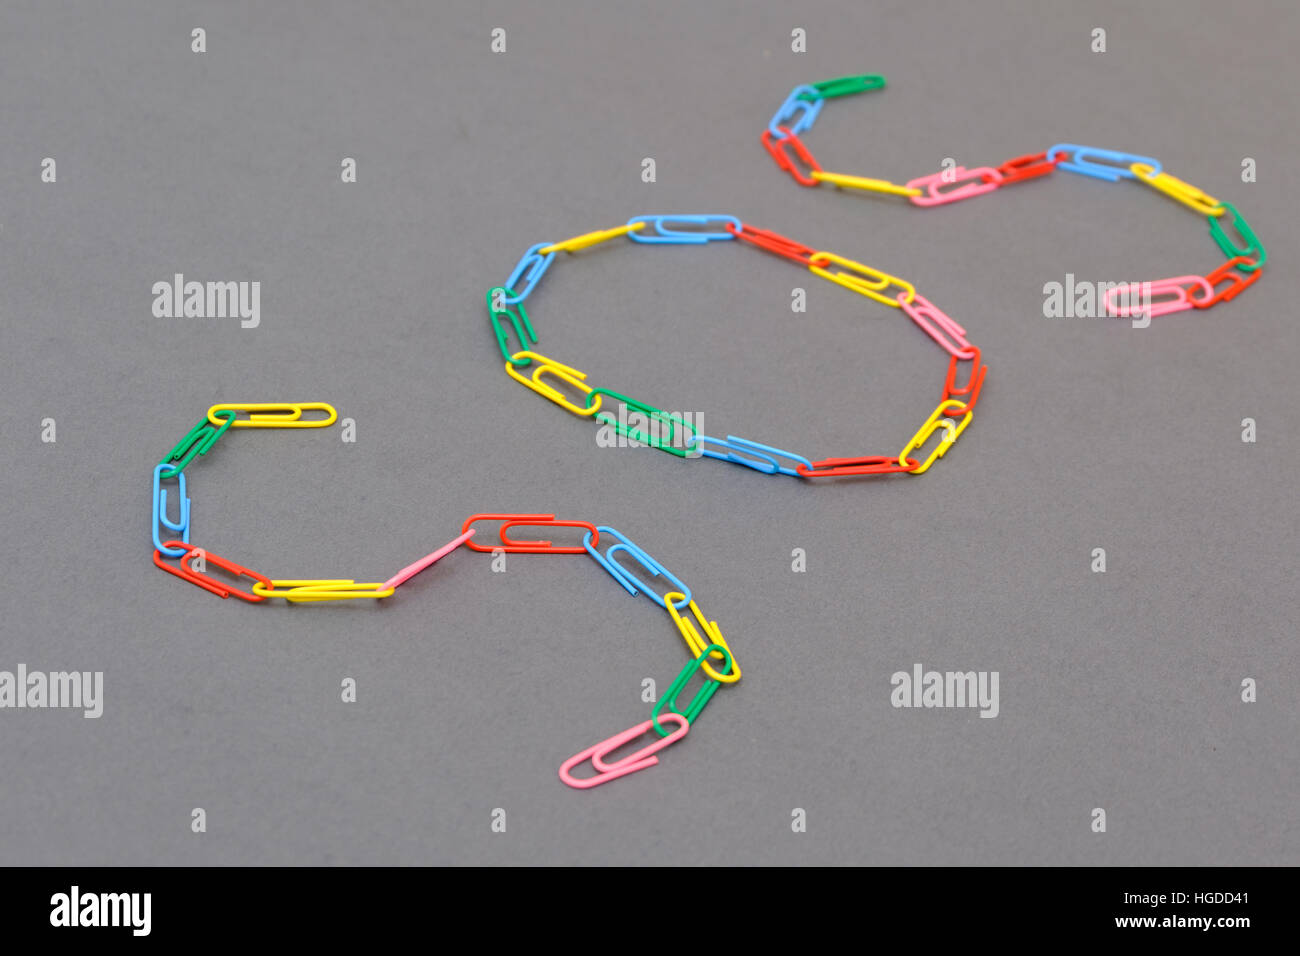 Sos word made of paper clips isolated Stock Photo